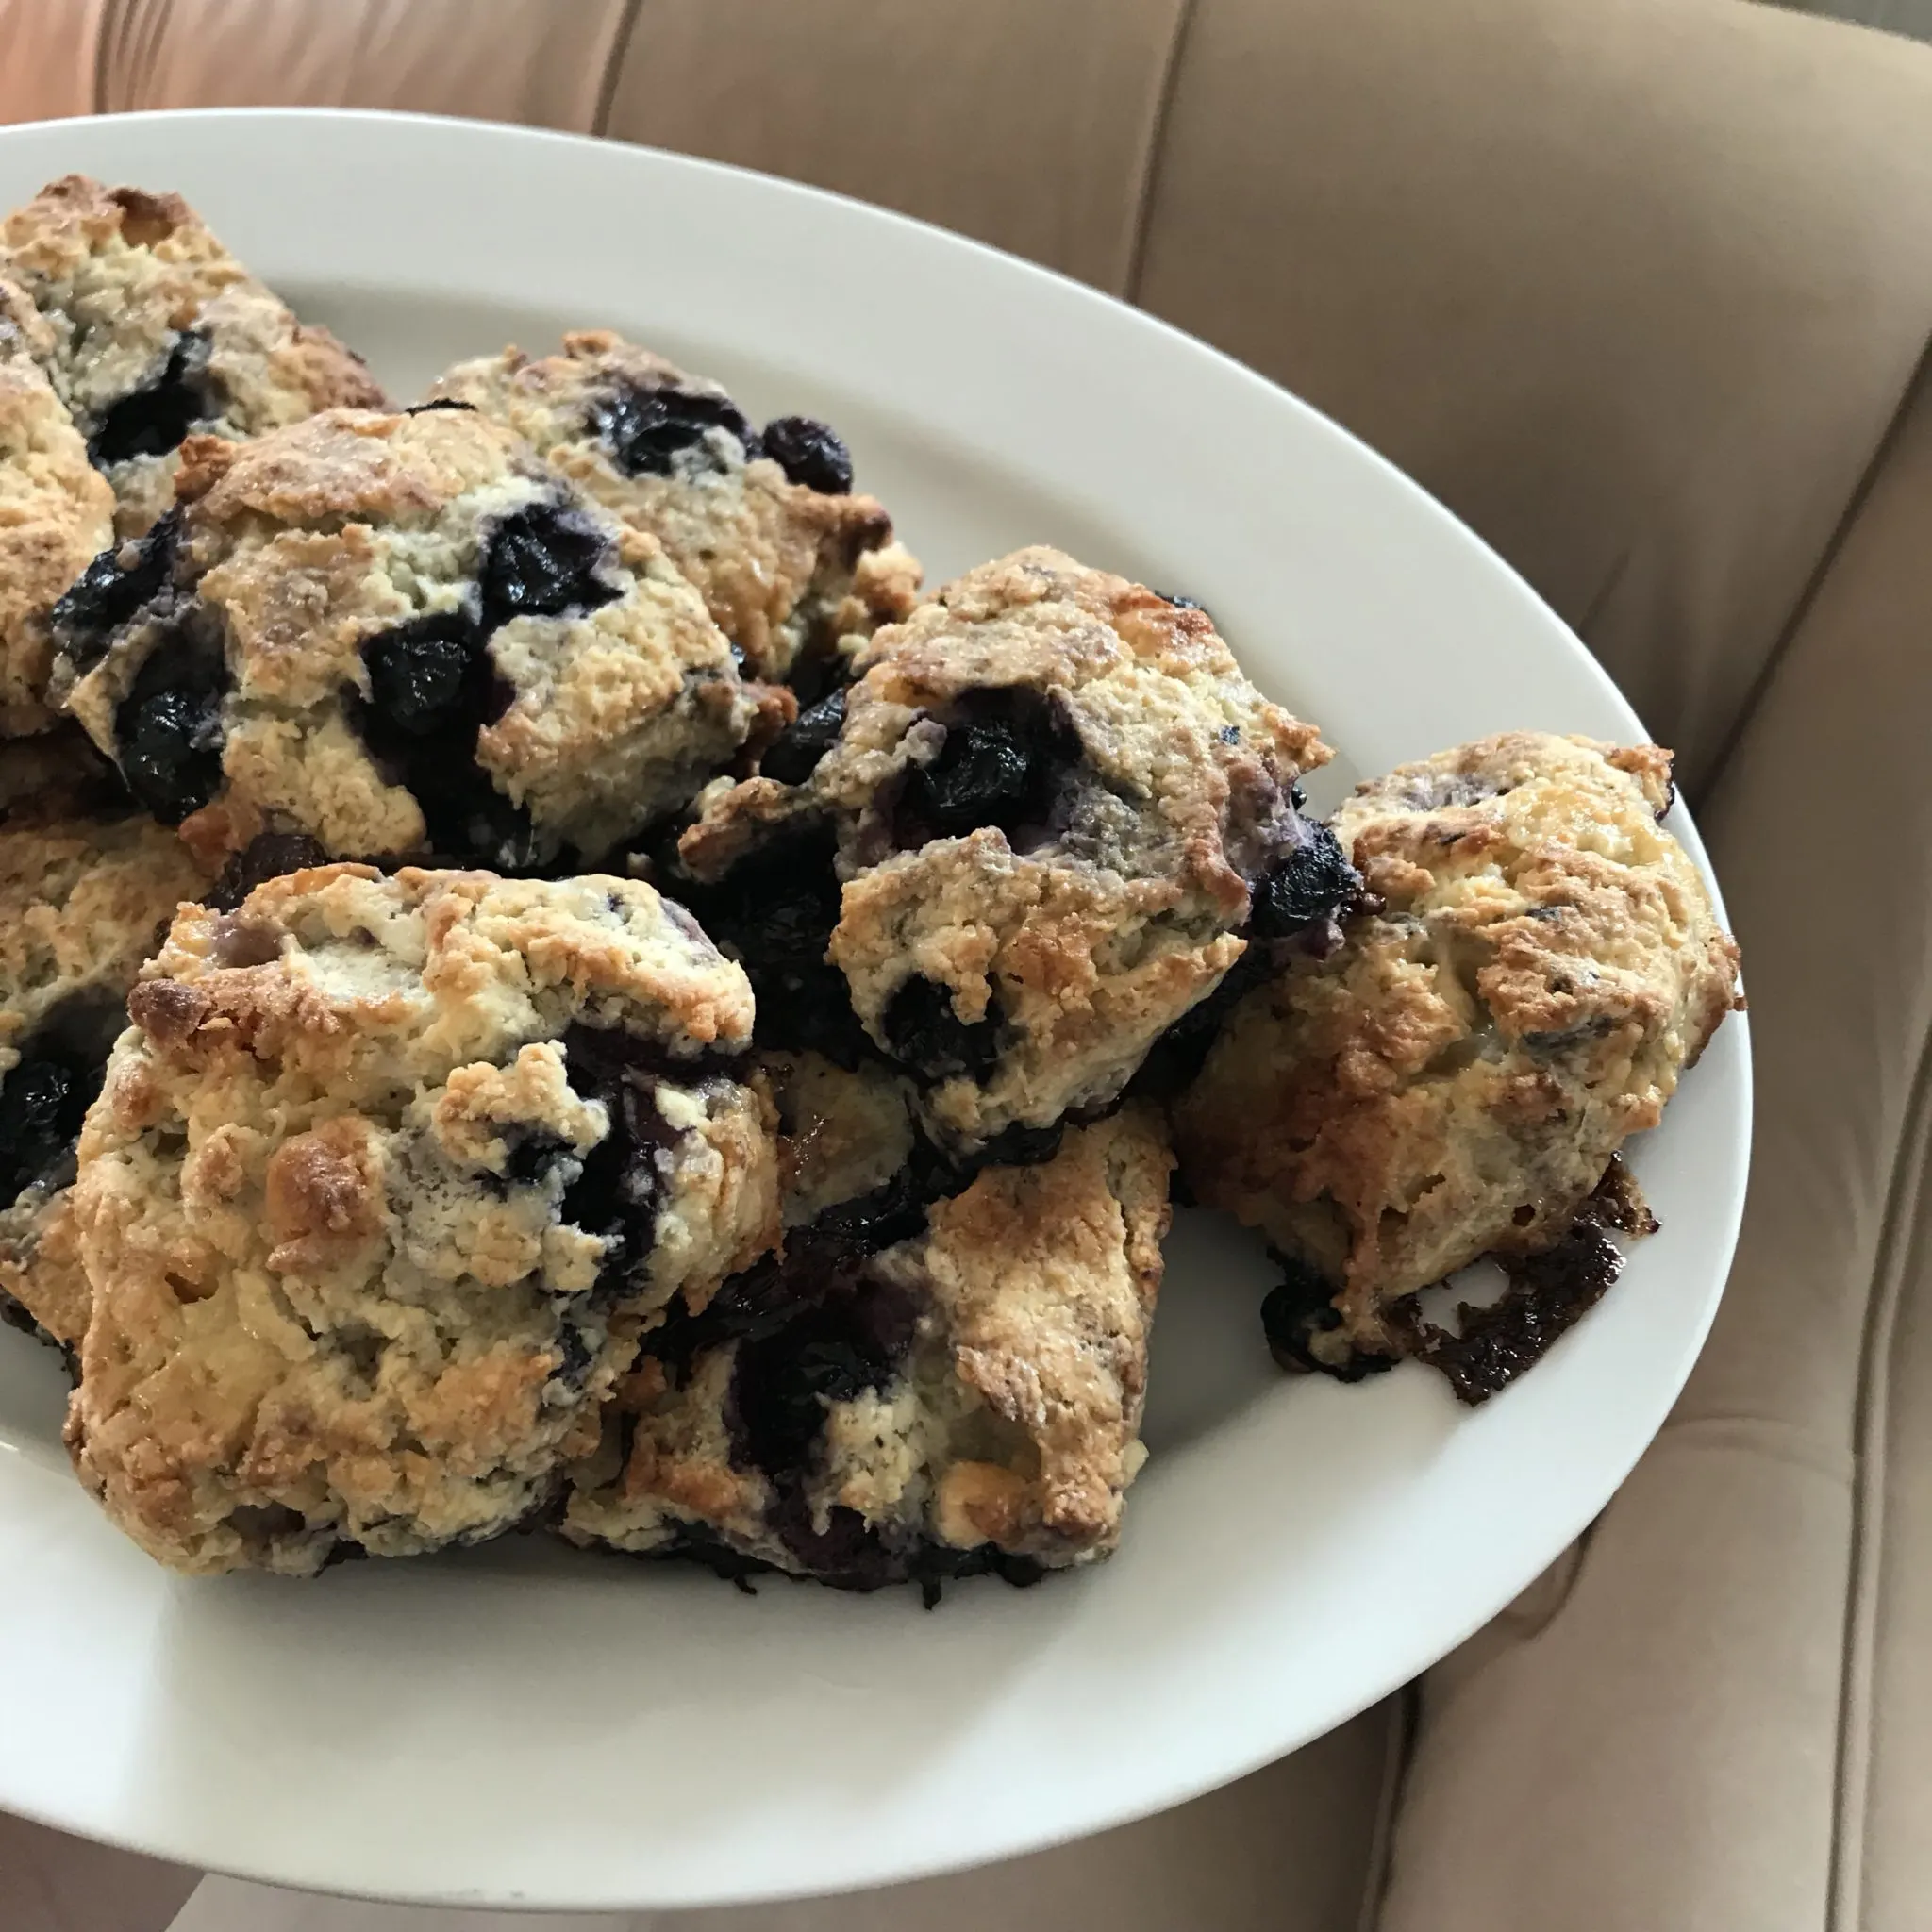 Ending cooking ruts with scones